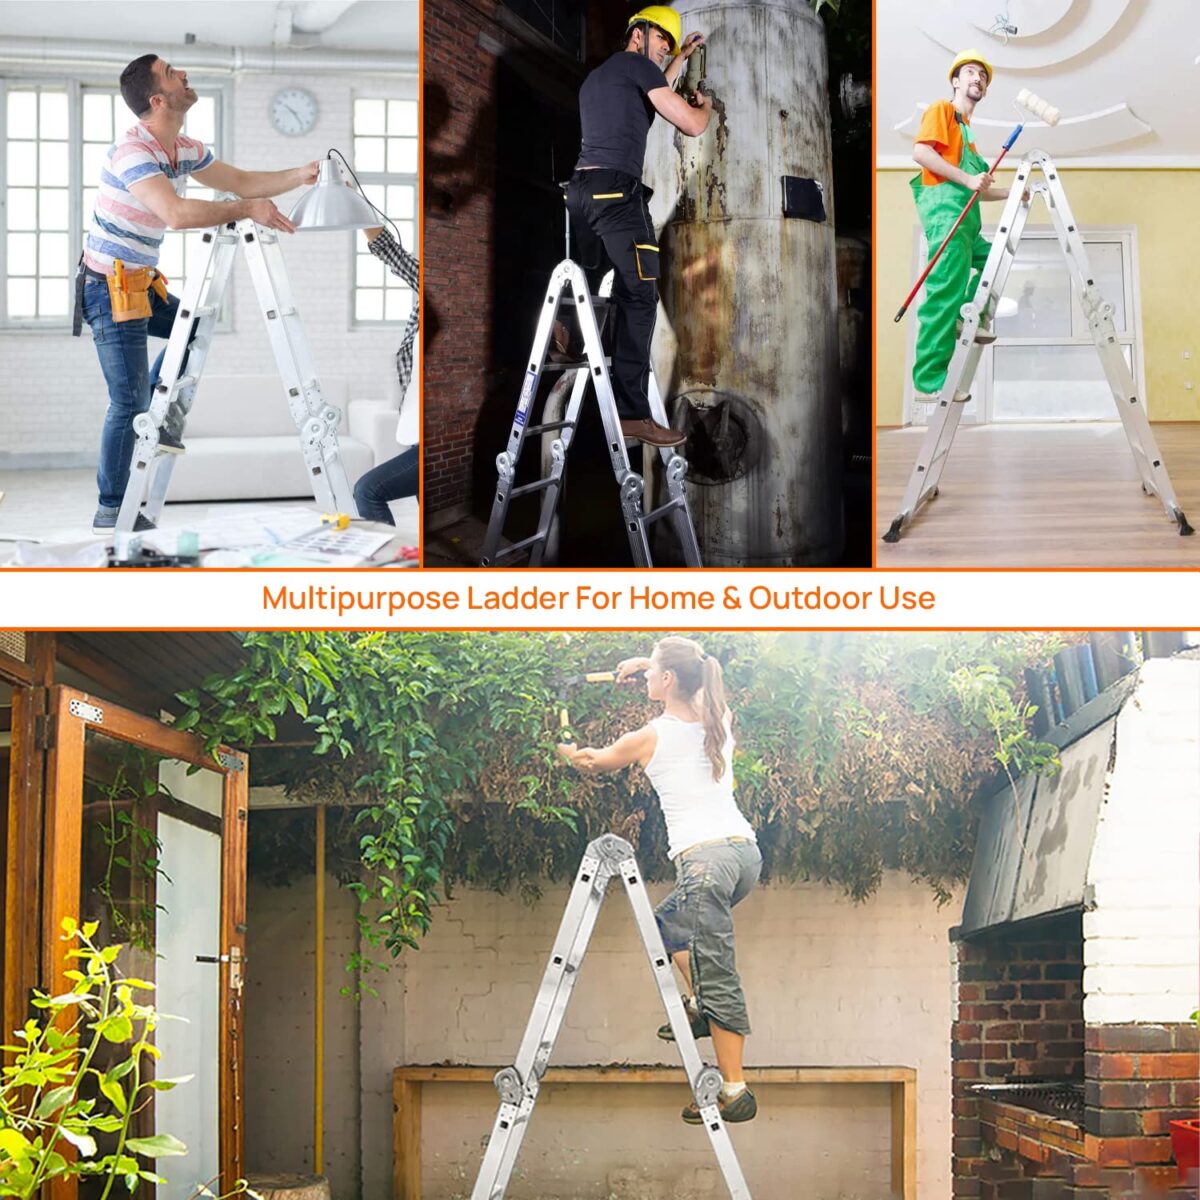 Why Professionals and Homeowners Favor Telescopic Ladder